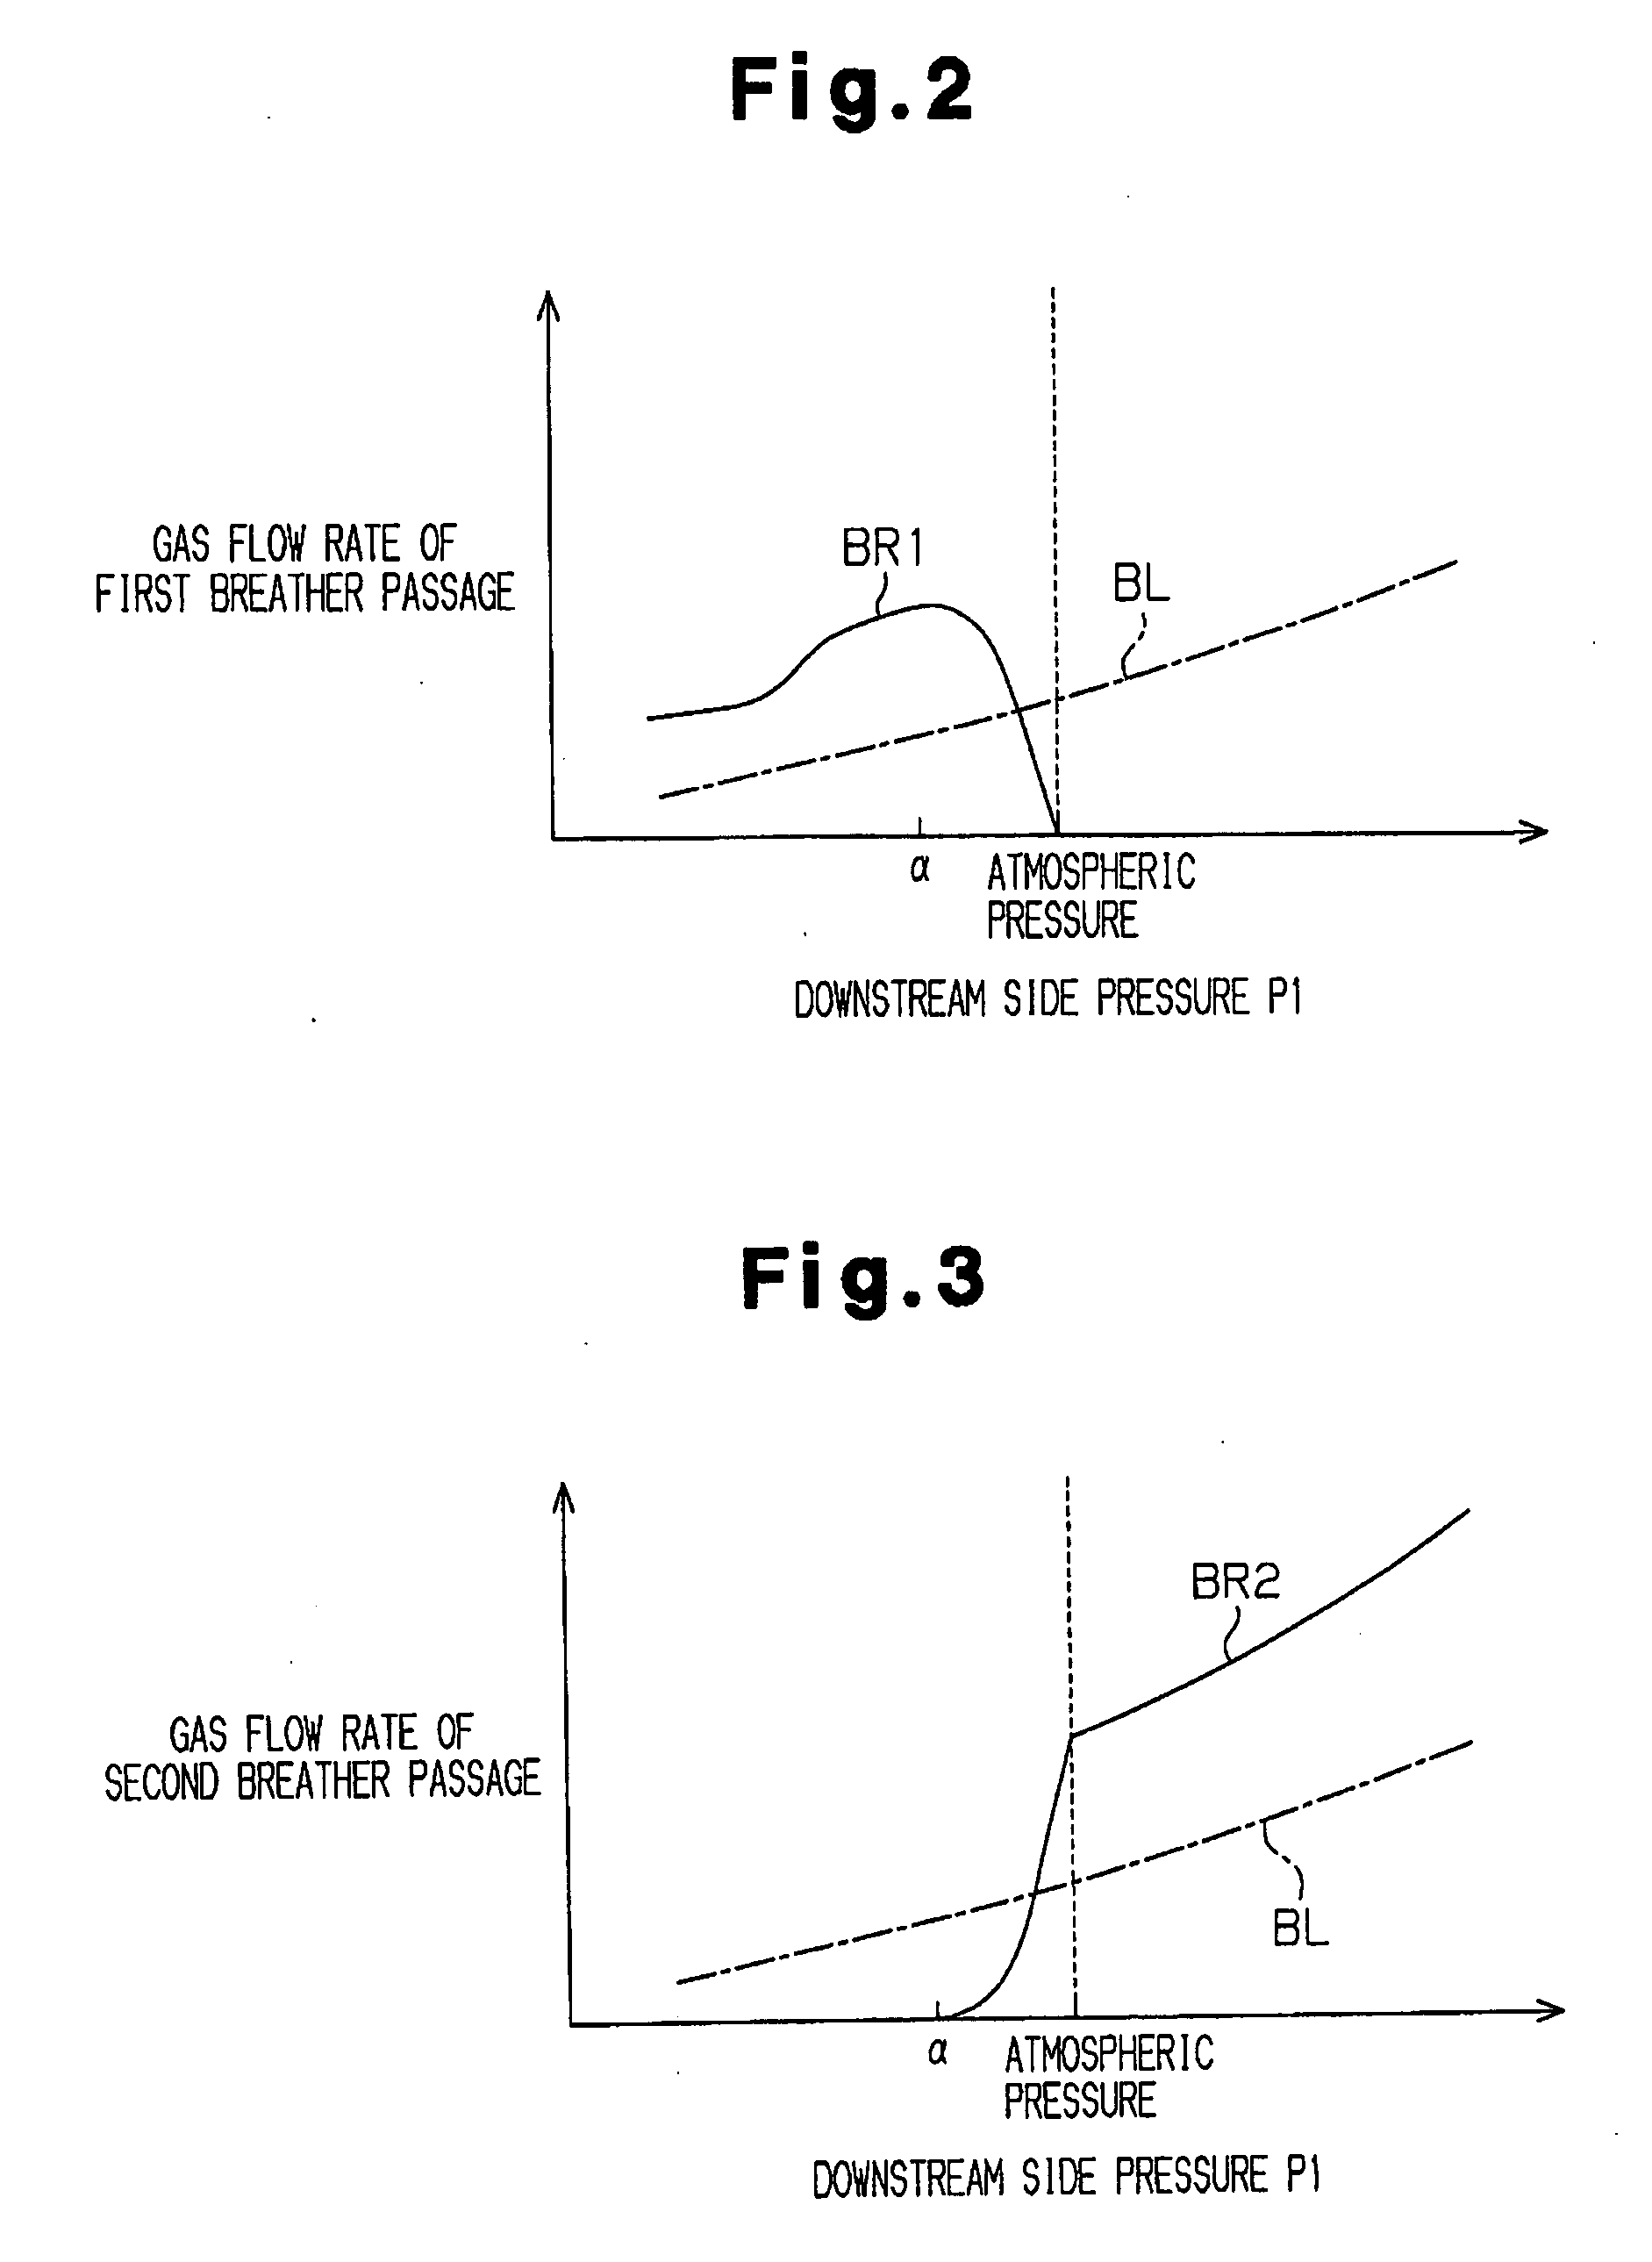 Blow-by gas processing apparatus